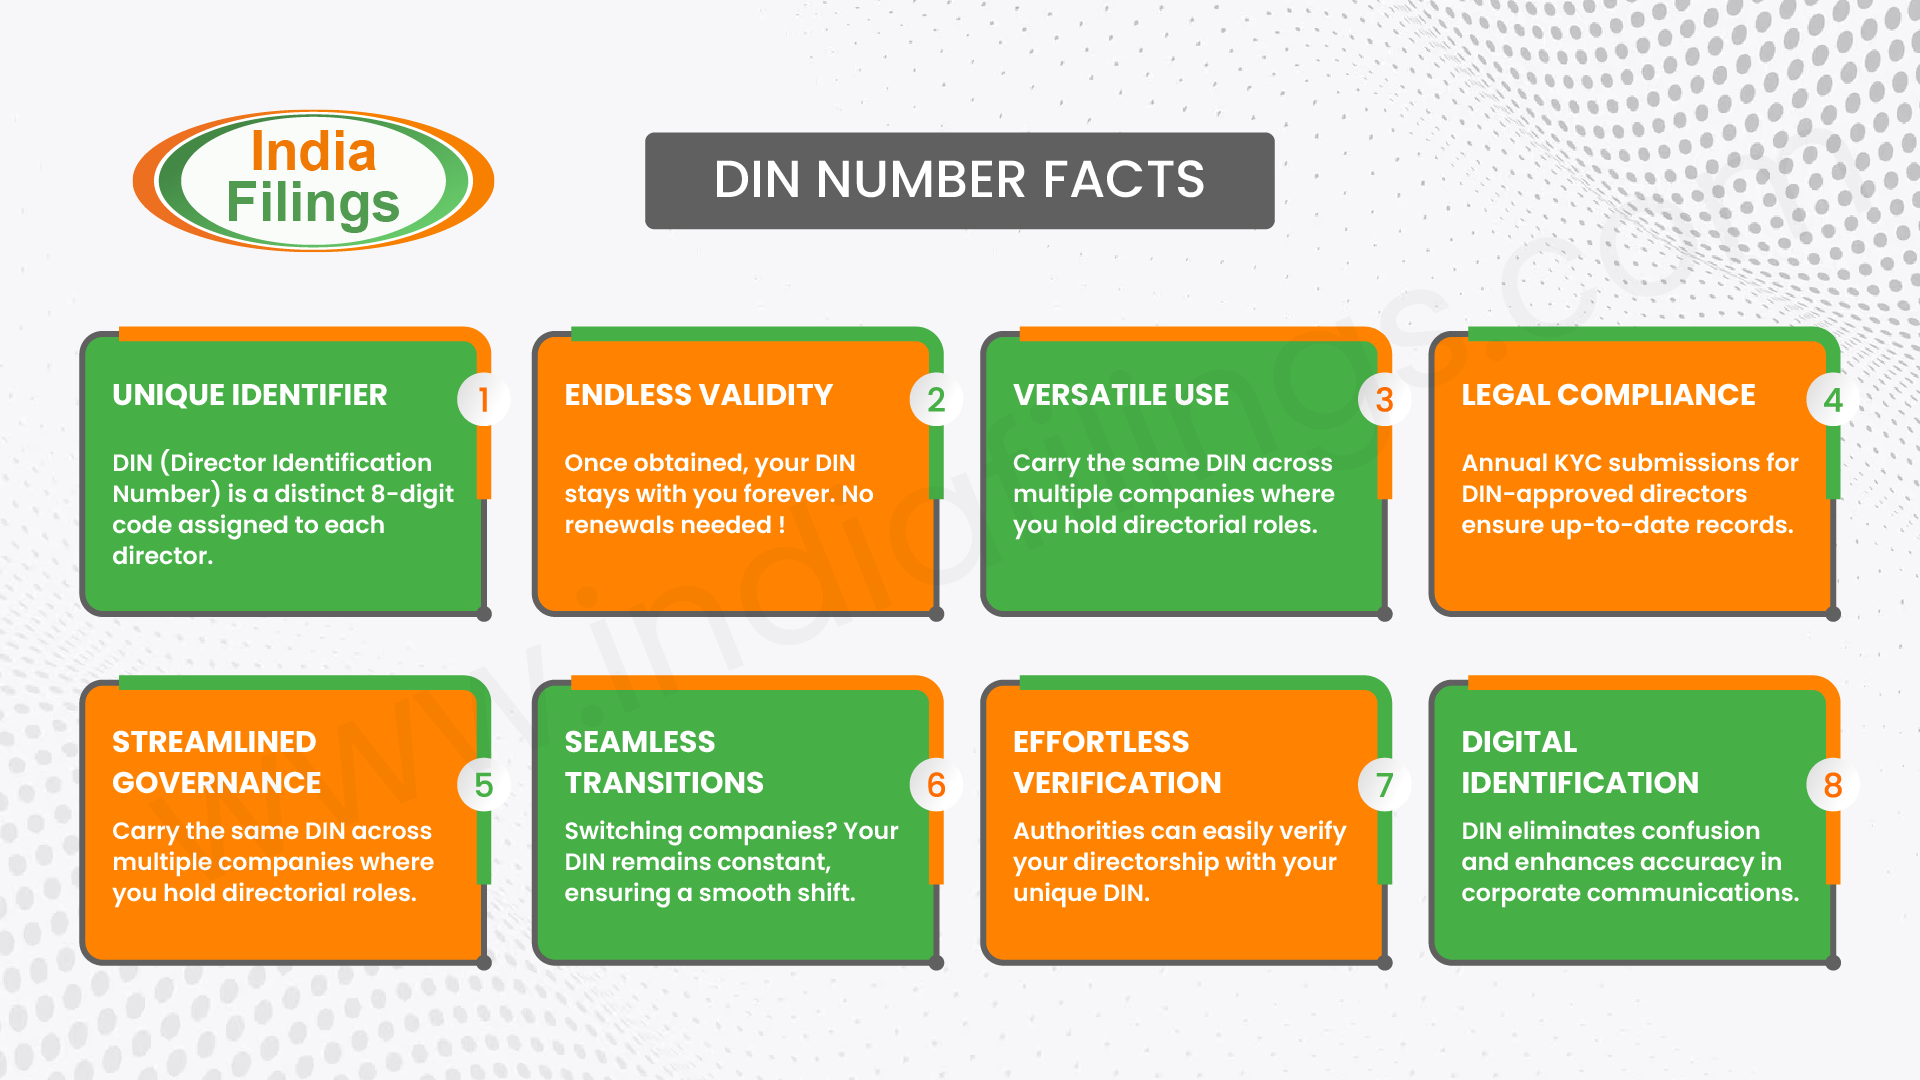 DIN Number Facts